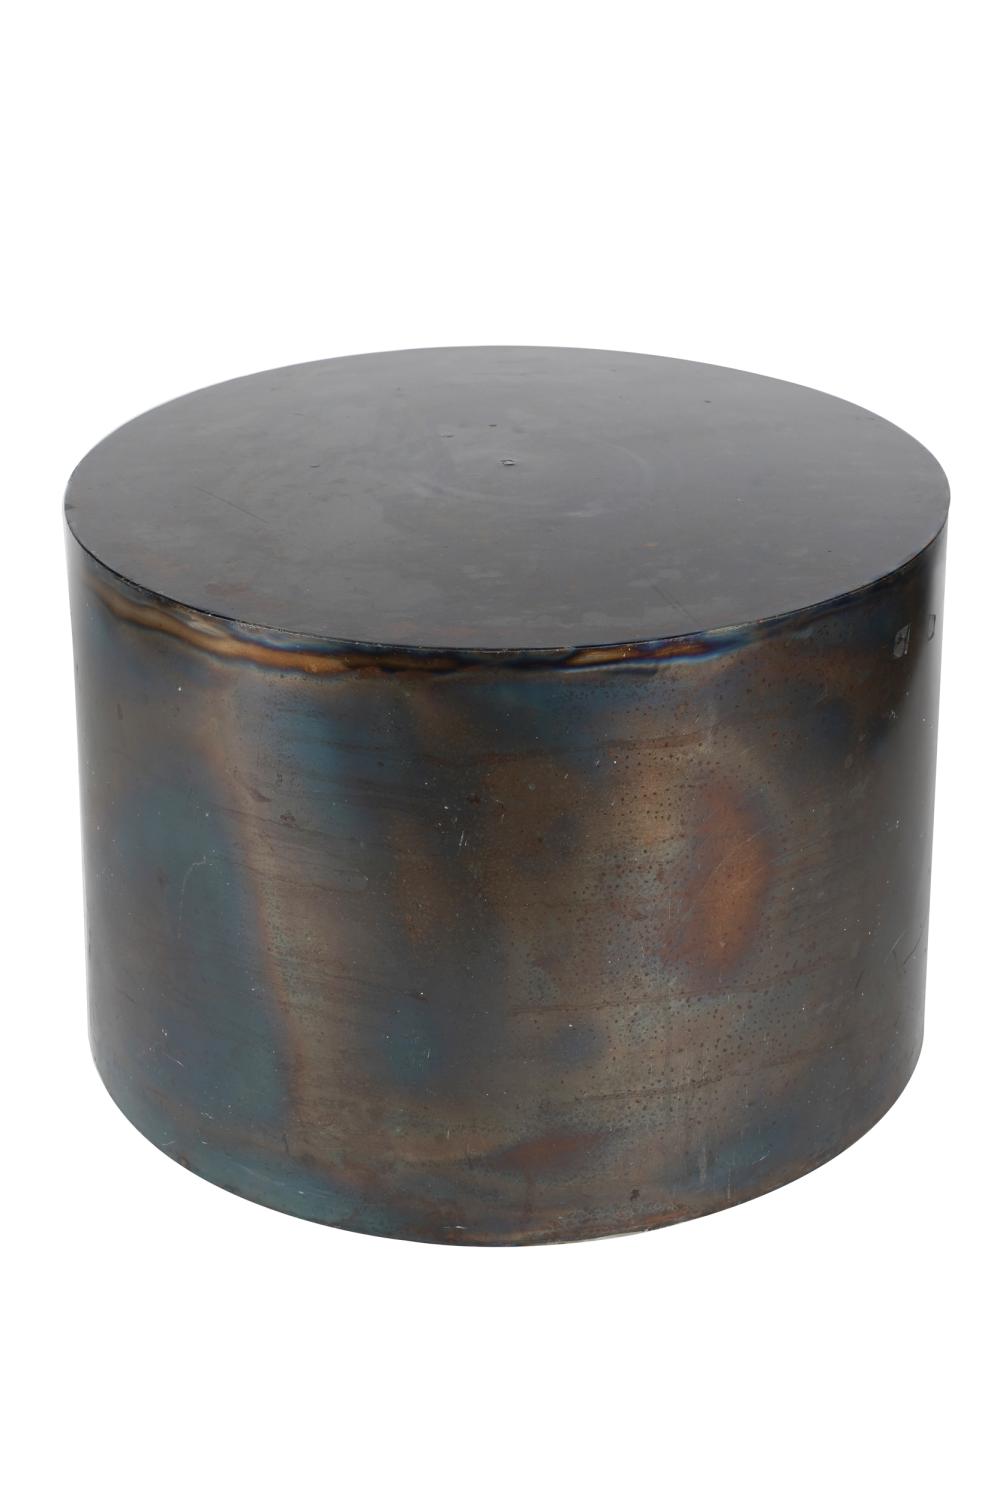 CONTEMPORARY METAL DRUM TABLECondition: